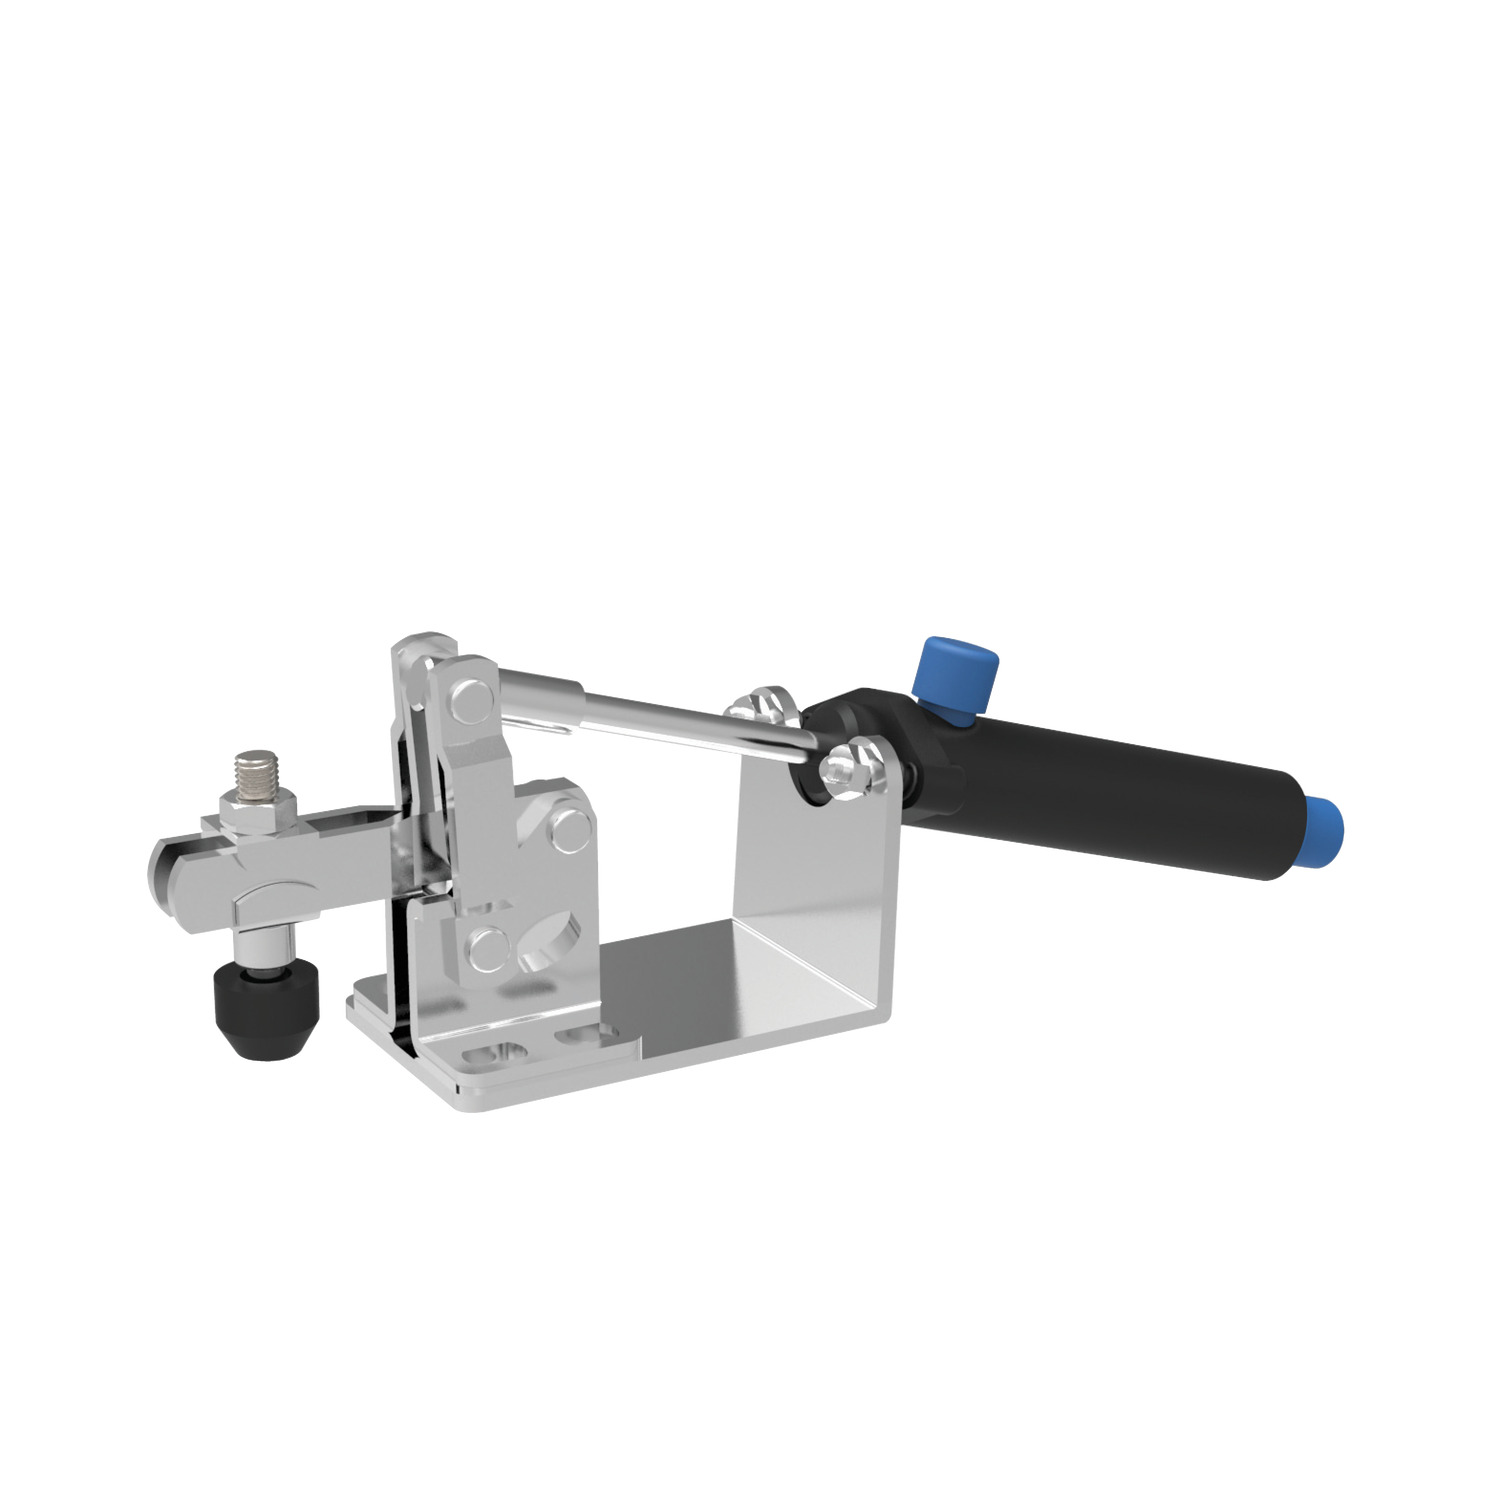 Pneumatic Toggle Clamp Pneumatic toggle clamps with horizontal cylinder attachment. The console is self-supporting and must be clear of other surfaces.